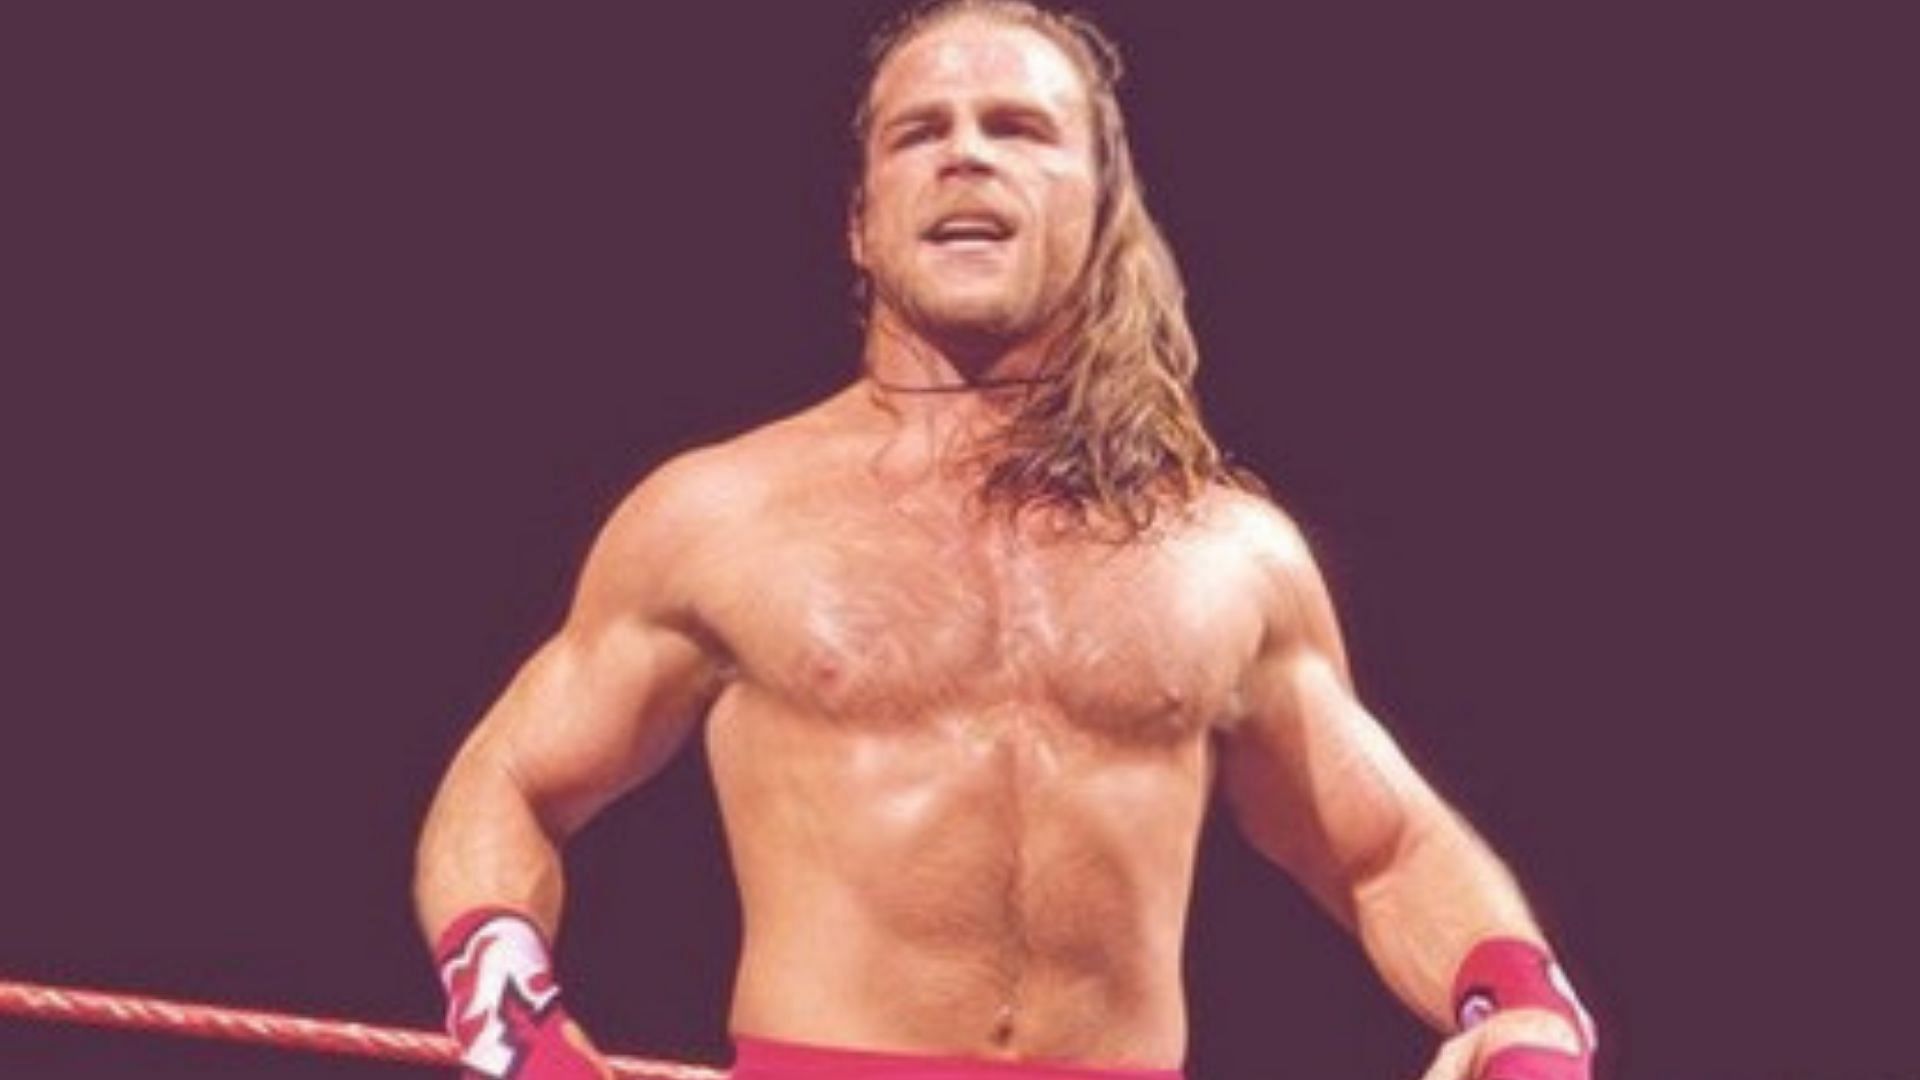 Shawn Michaels in the WWF in the 1990s